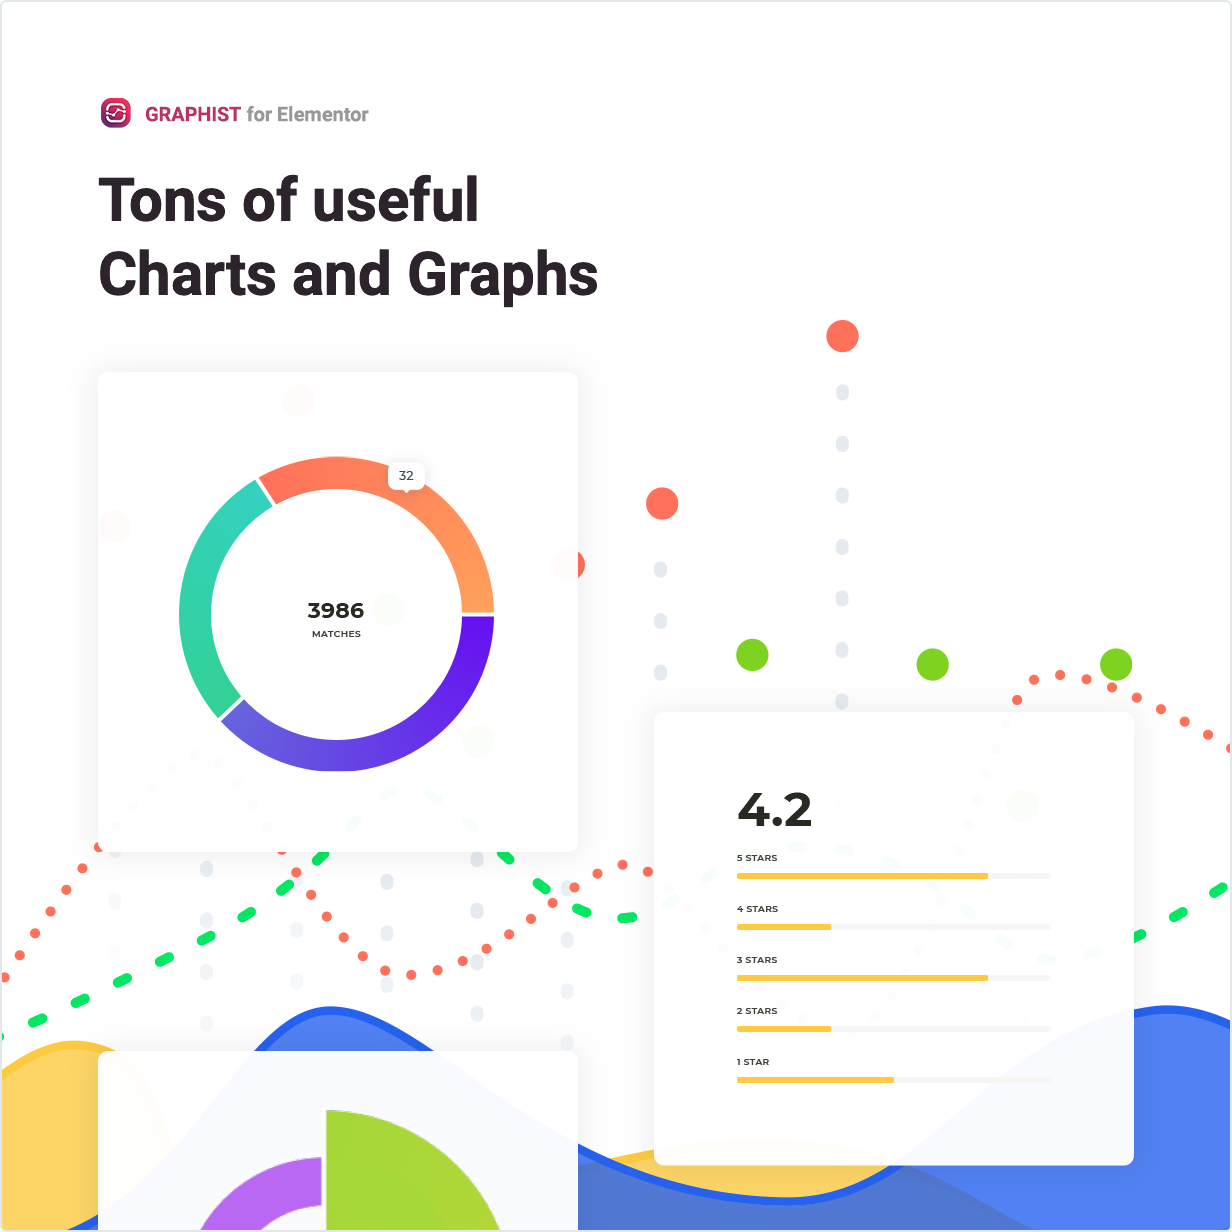 Tons of useful Charts and Graphs